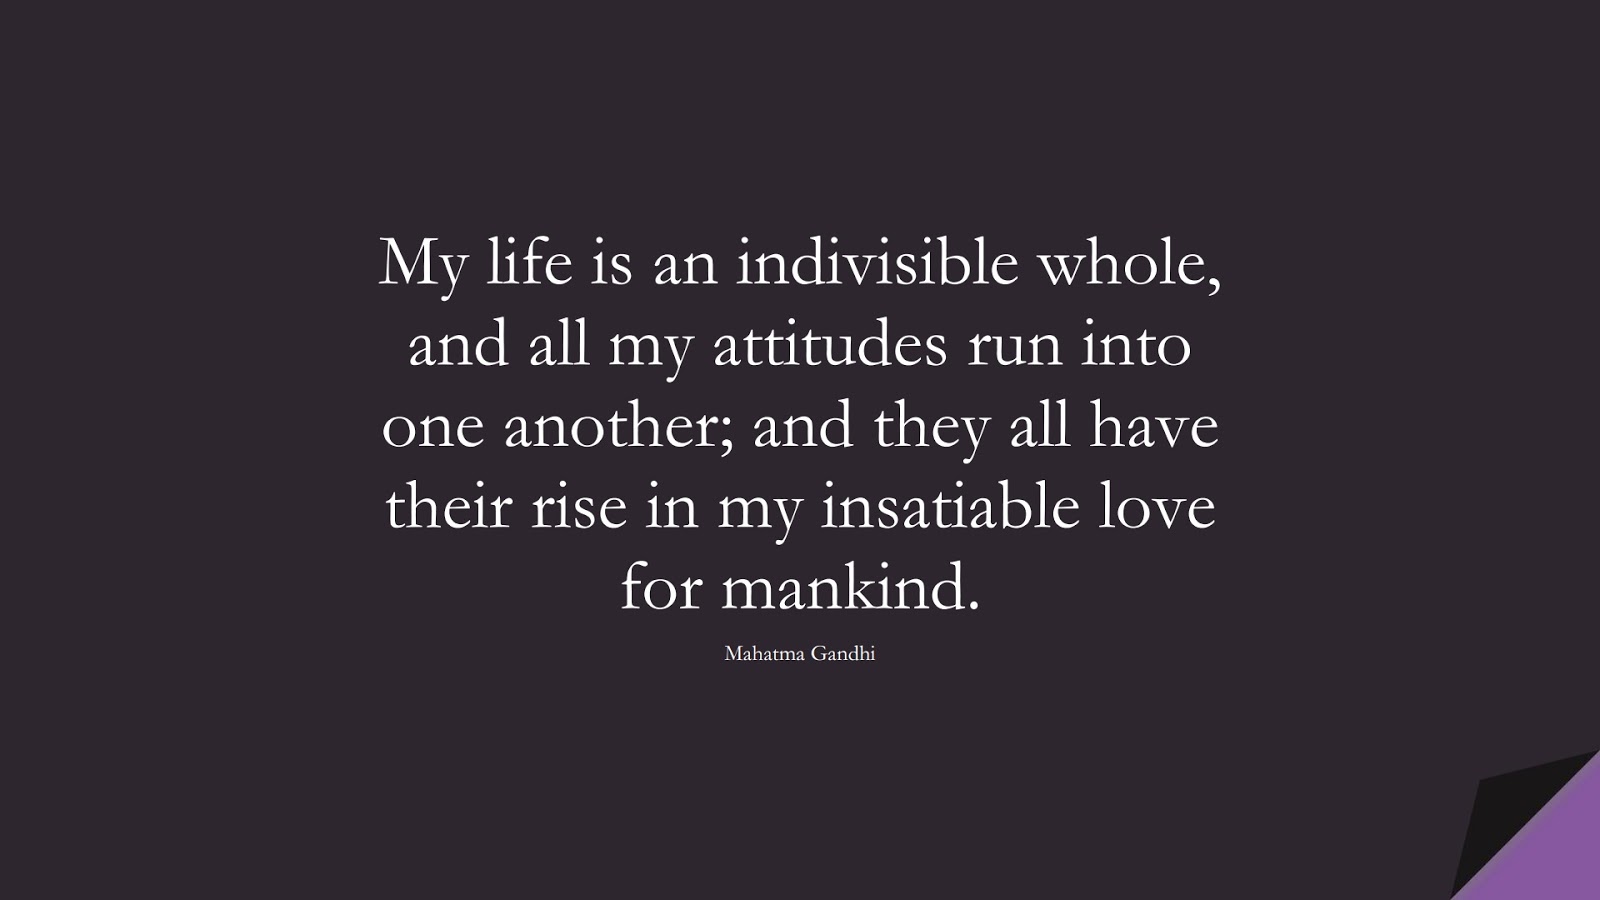 My life is an indivisible whole, and all my attitudes run into one another; and they all have their rise in my insatiable love for mankind. (Mahatma Gandhi);  #HumanityQuotes